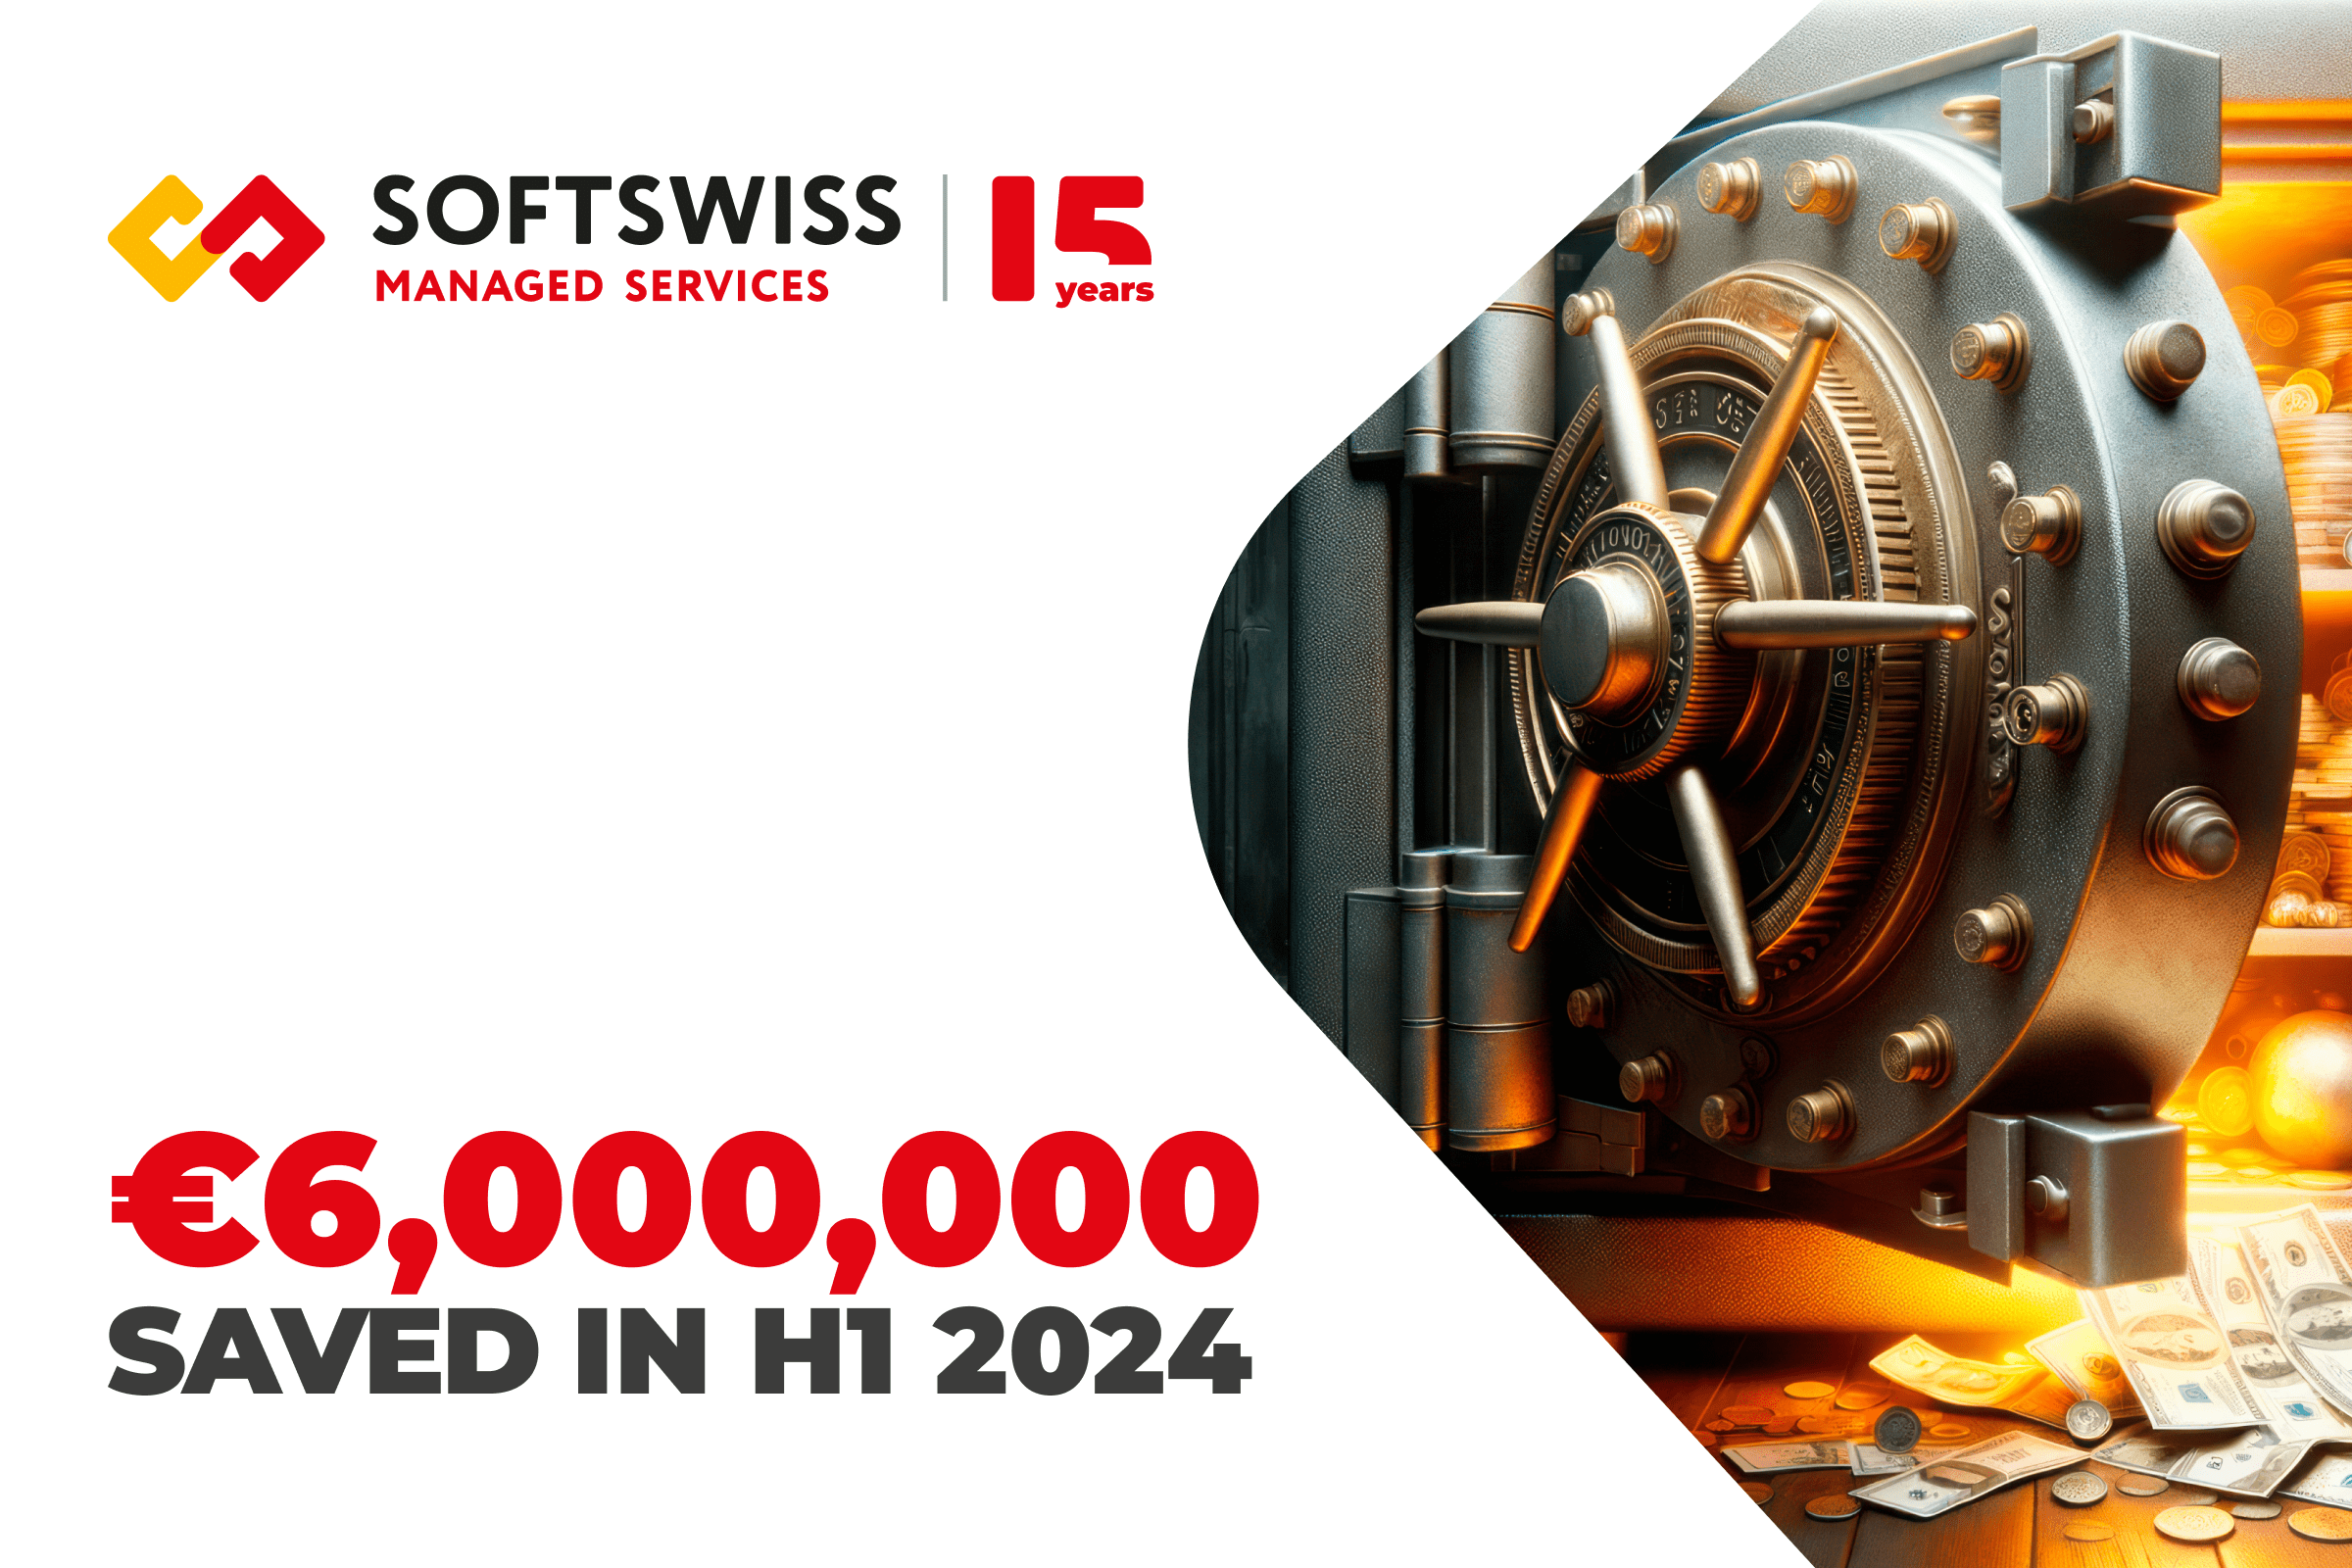 SOFTSWISS Helps Operators Save €6m in H1 2024